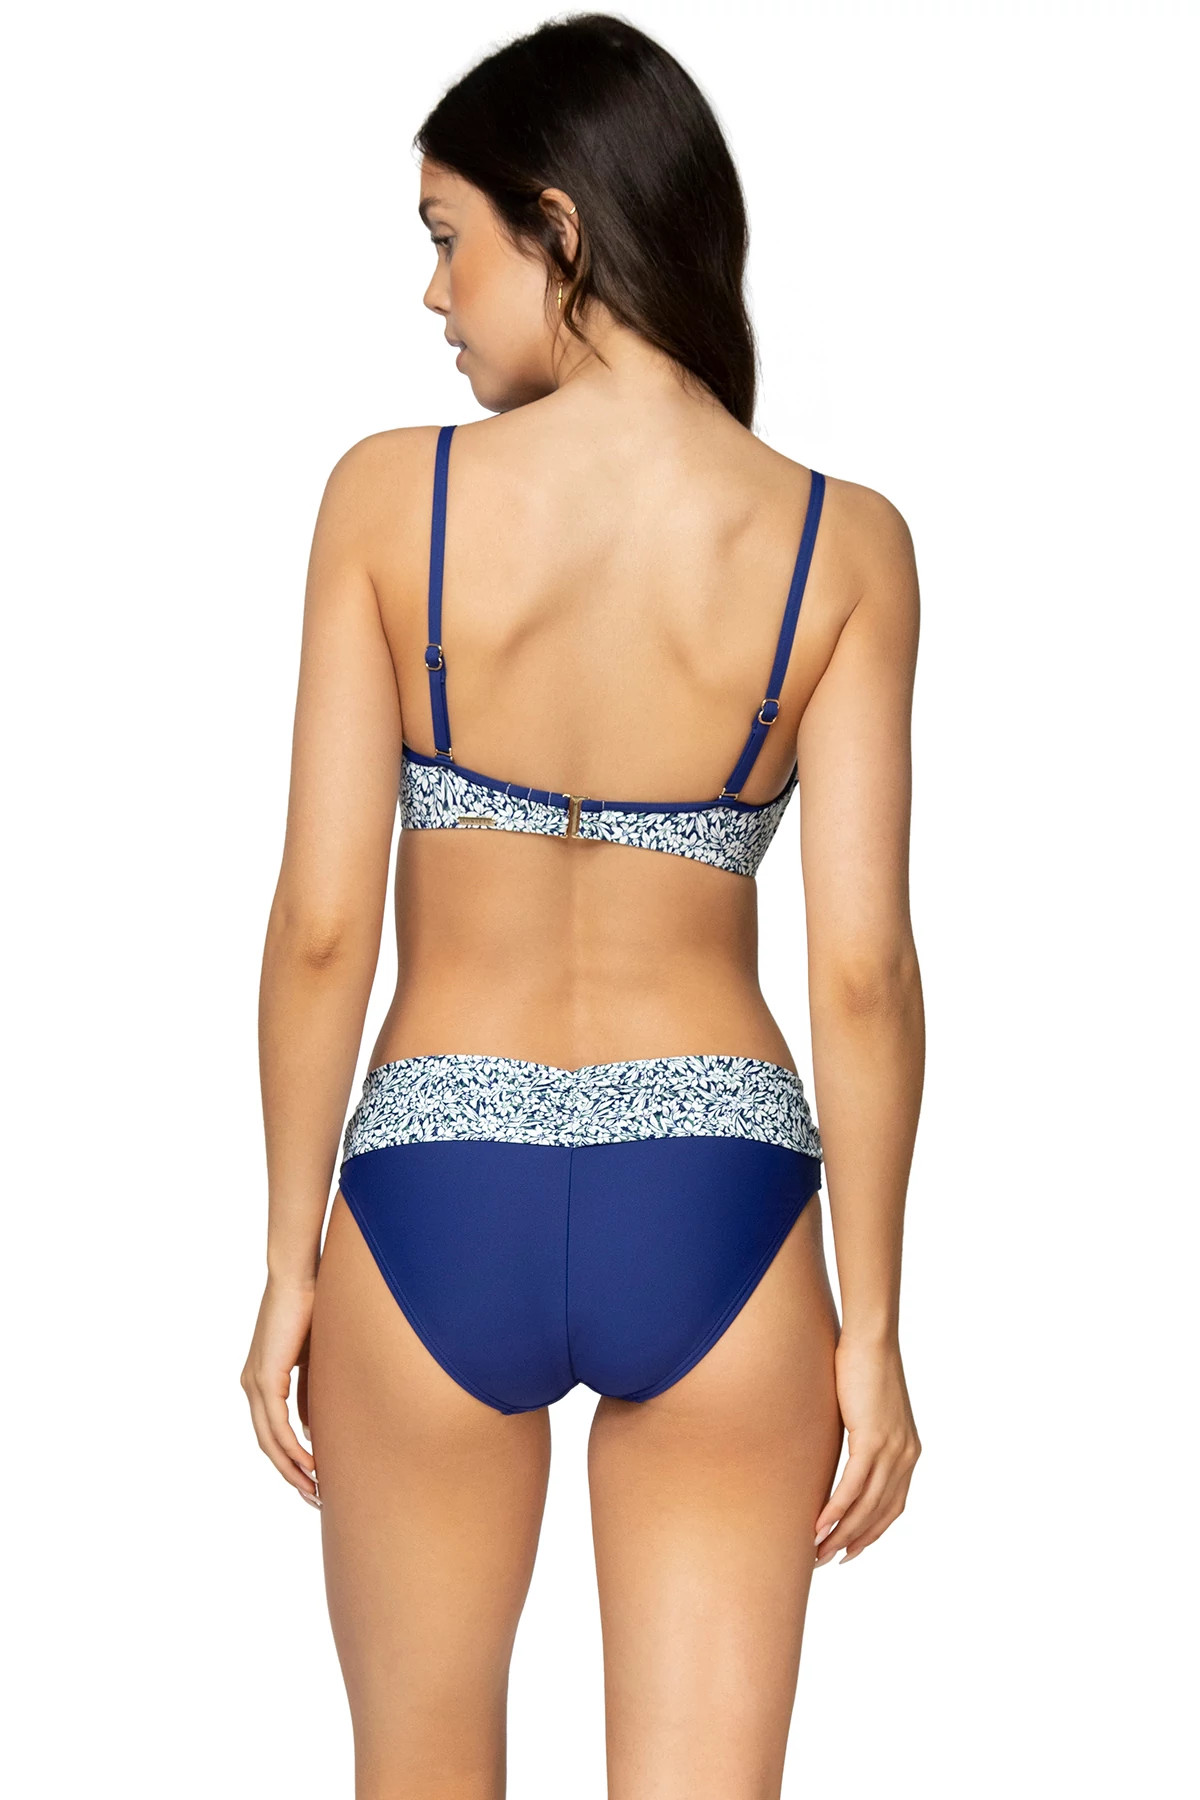 FORGET ME NOT Iconic Twist Underwire Bandeau Bikini Top (D+ Cup) image number 2